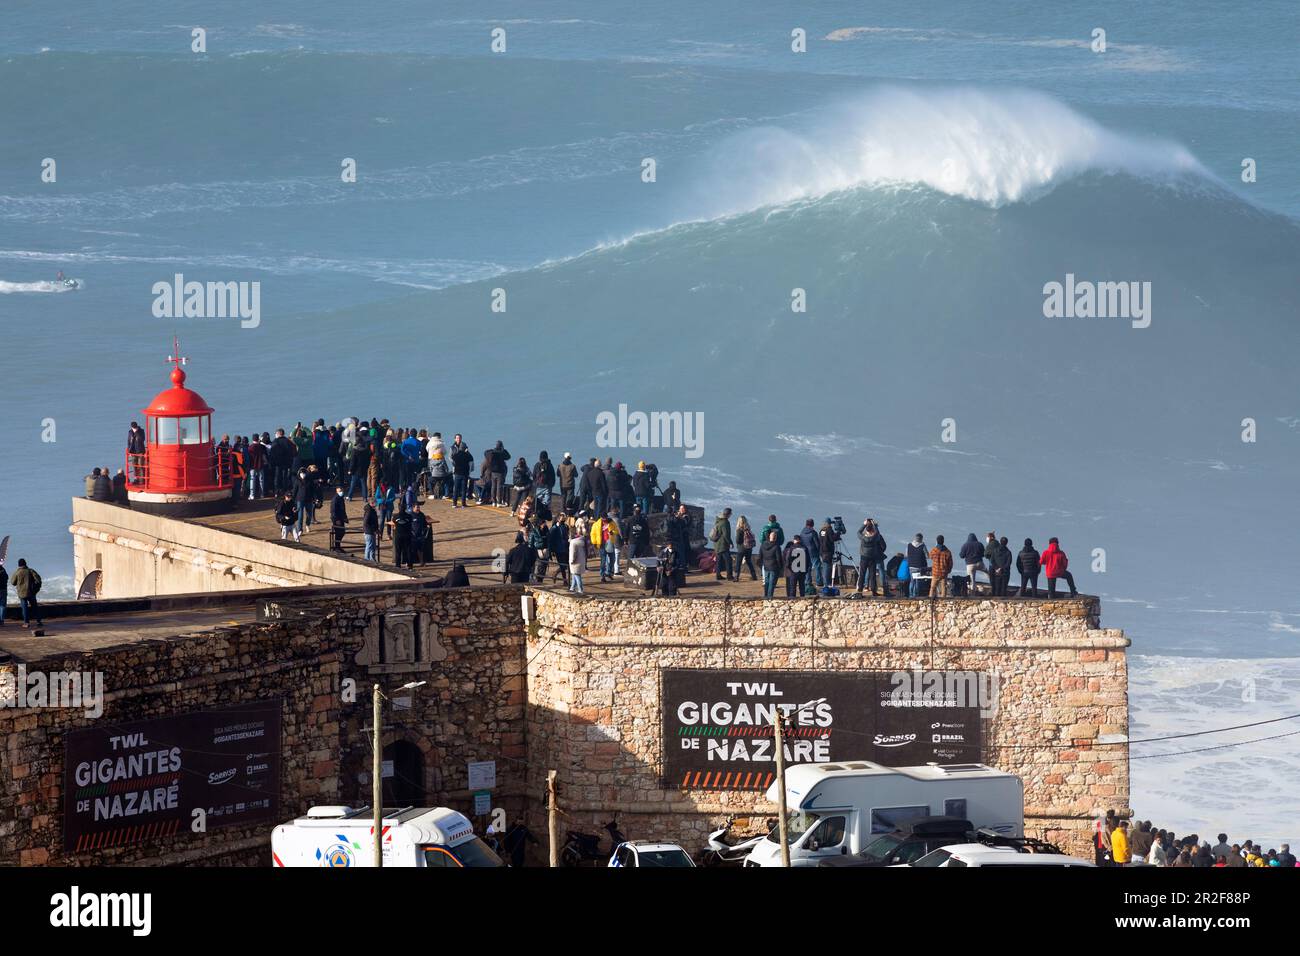 Europe, Portugal, Oeste Region, Nazaré, Crowd watching the Huge Waves from Forte de Sao Miguel Arcanjo during Free Surfing Event 2022 Stock Photo